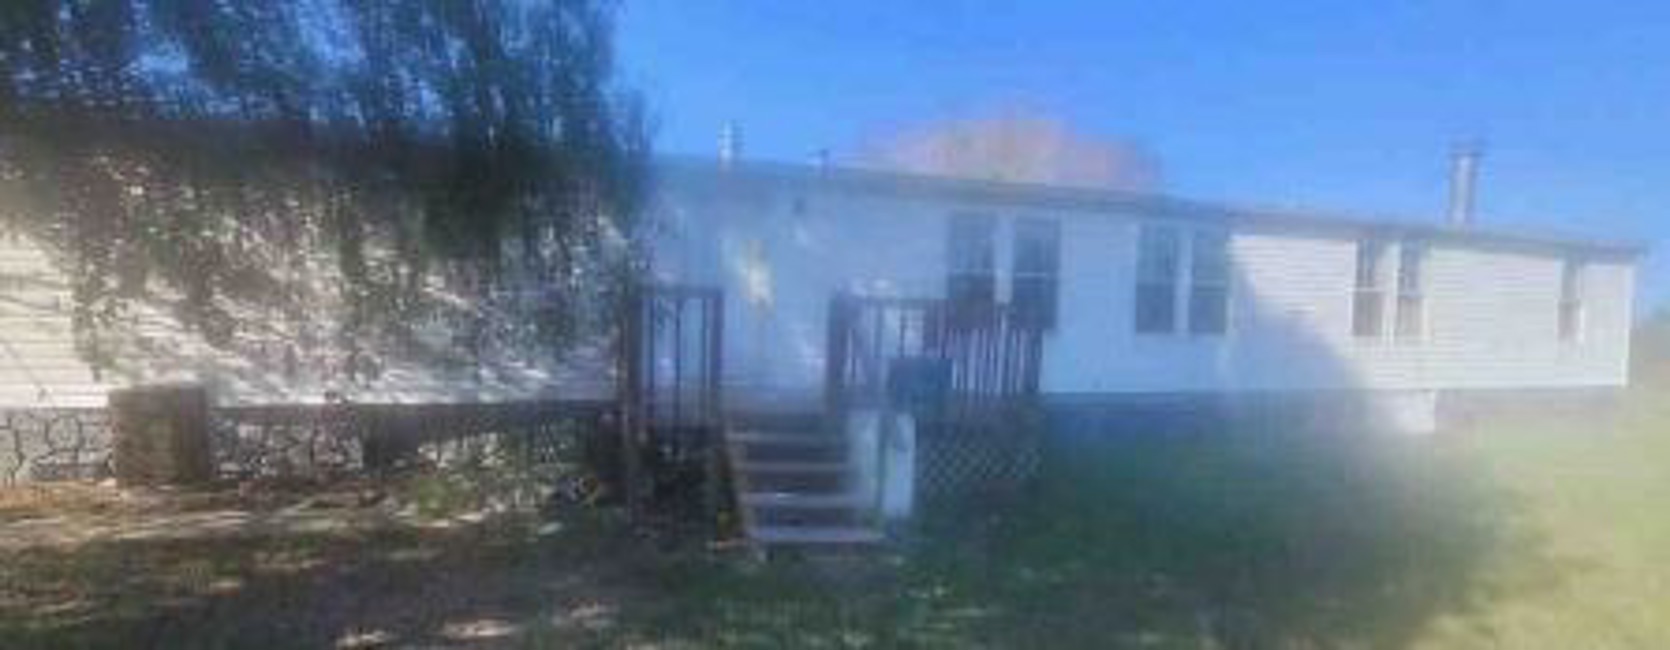 2nd Chance Foreclosure - Reported Vacant, 36801 Waco Rd, Shawnee, OK 74801